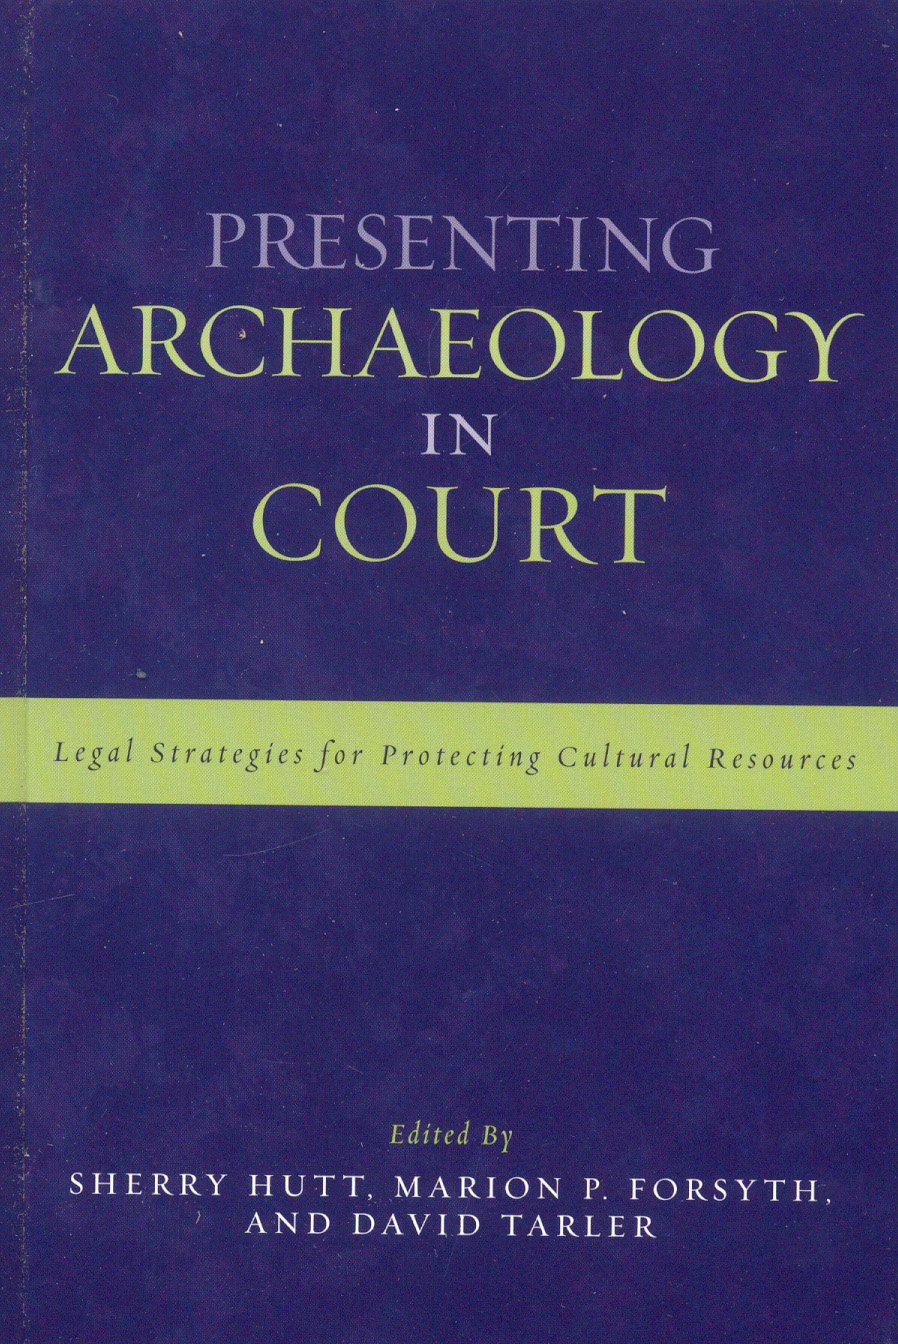 Presenting Archaeology in Court: A Guide to Legal Protection of Sites